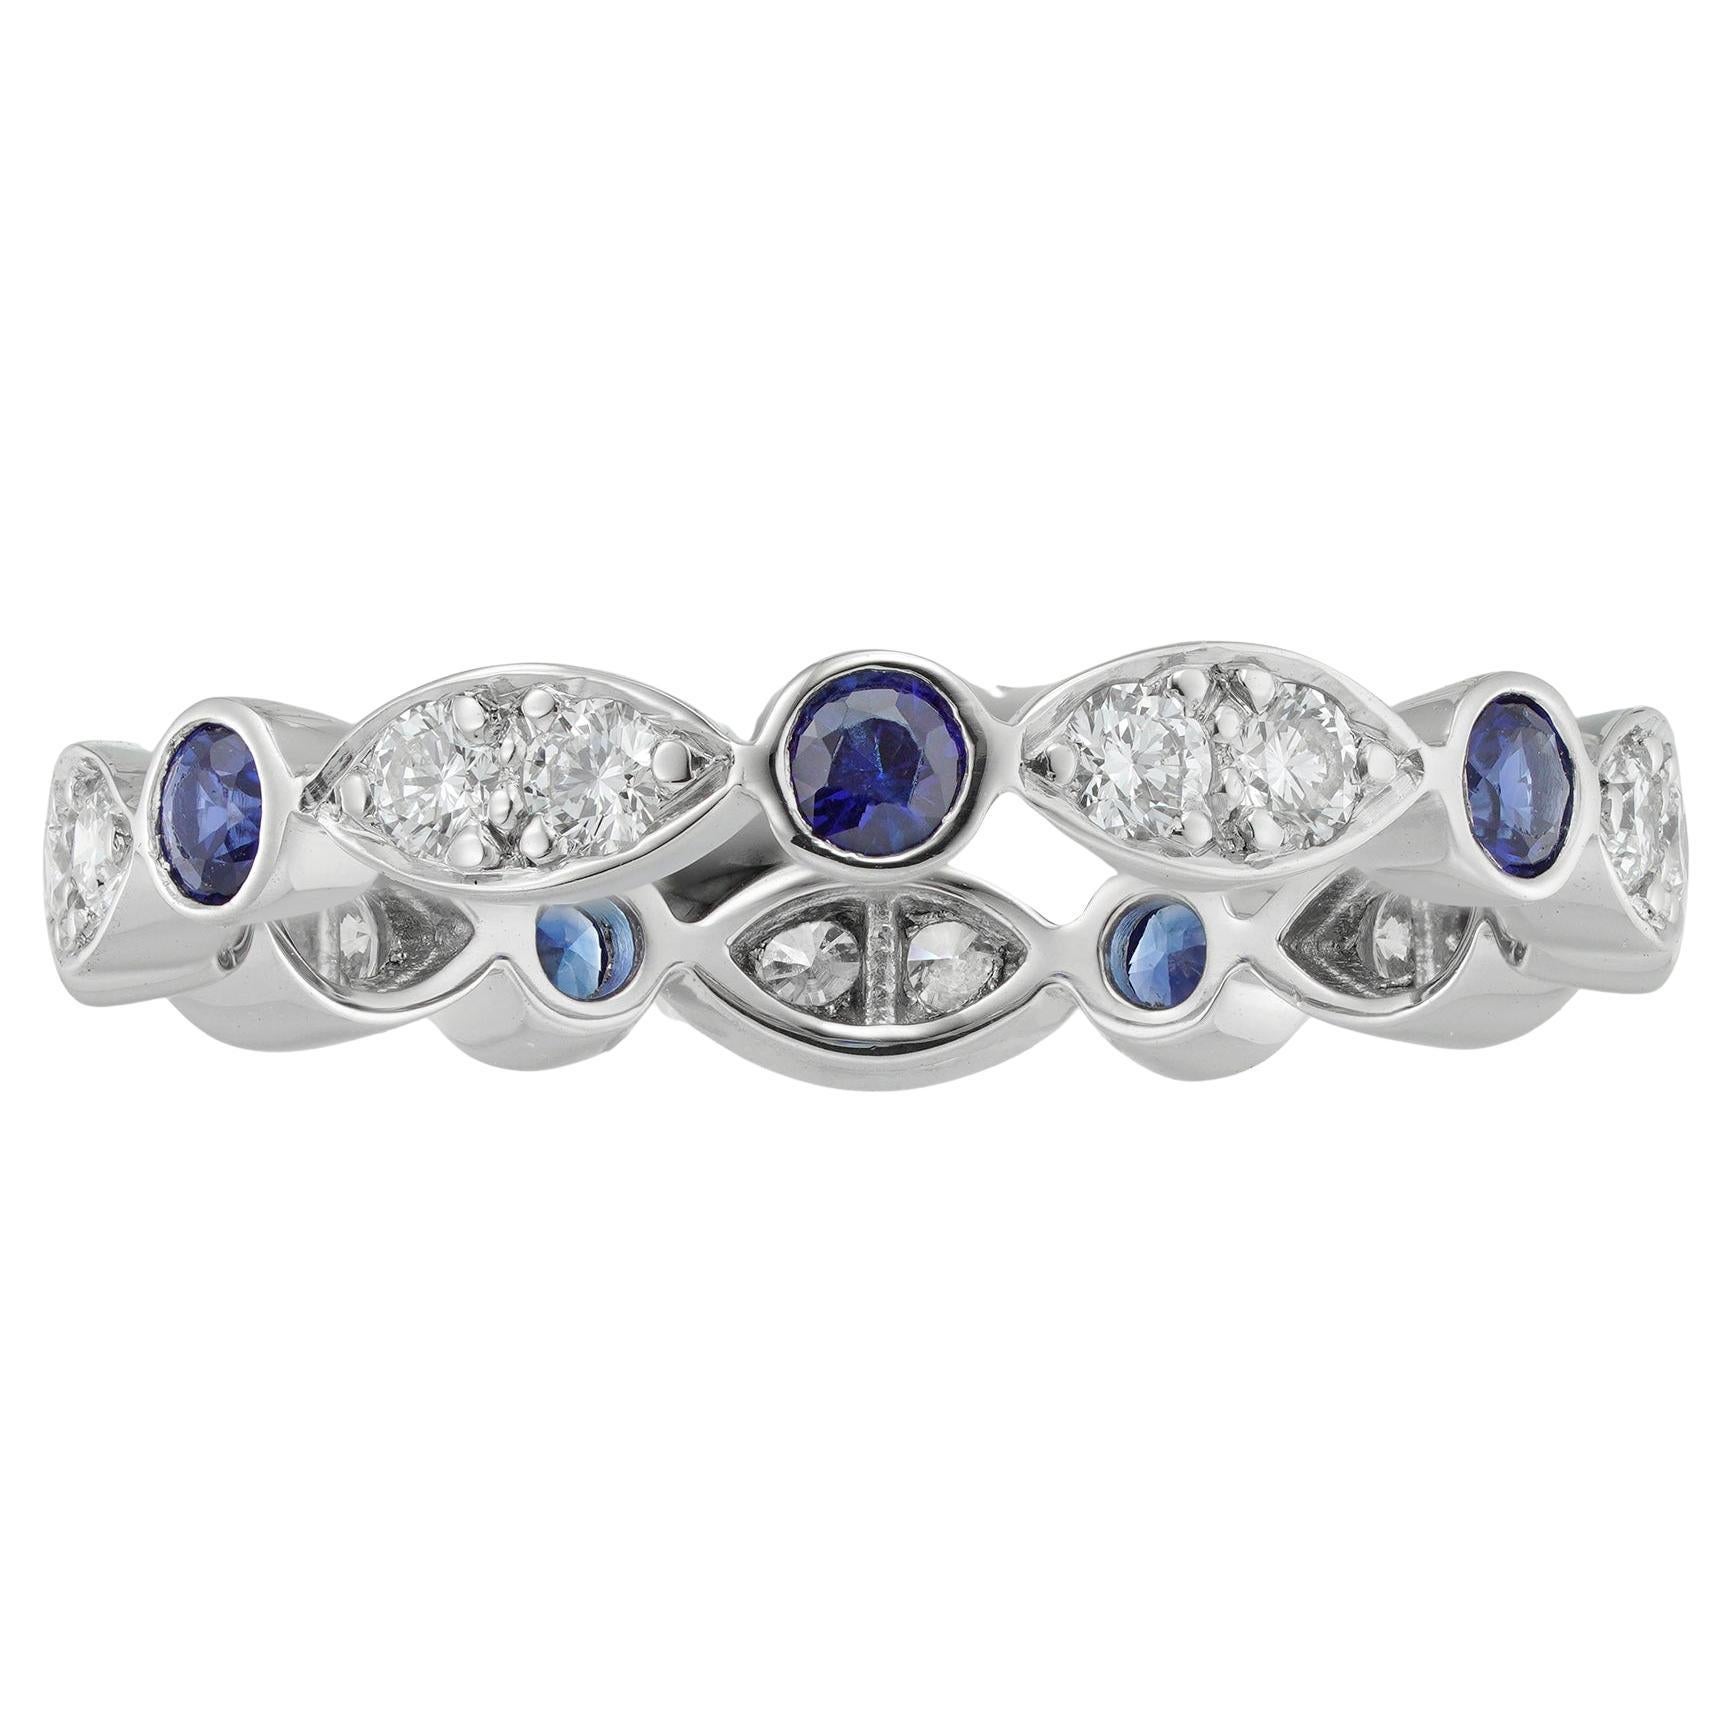 A Tiffany & Co sapphire and diamond ring from Jazz band collection For Sale